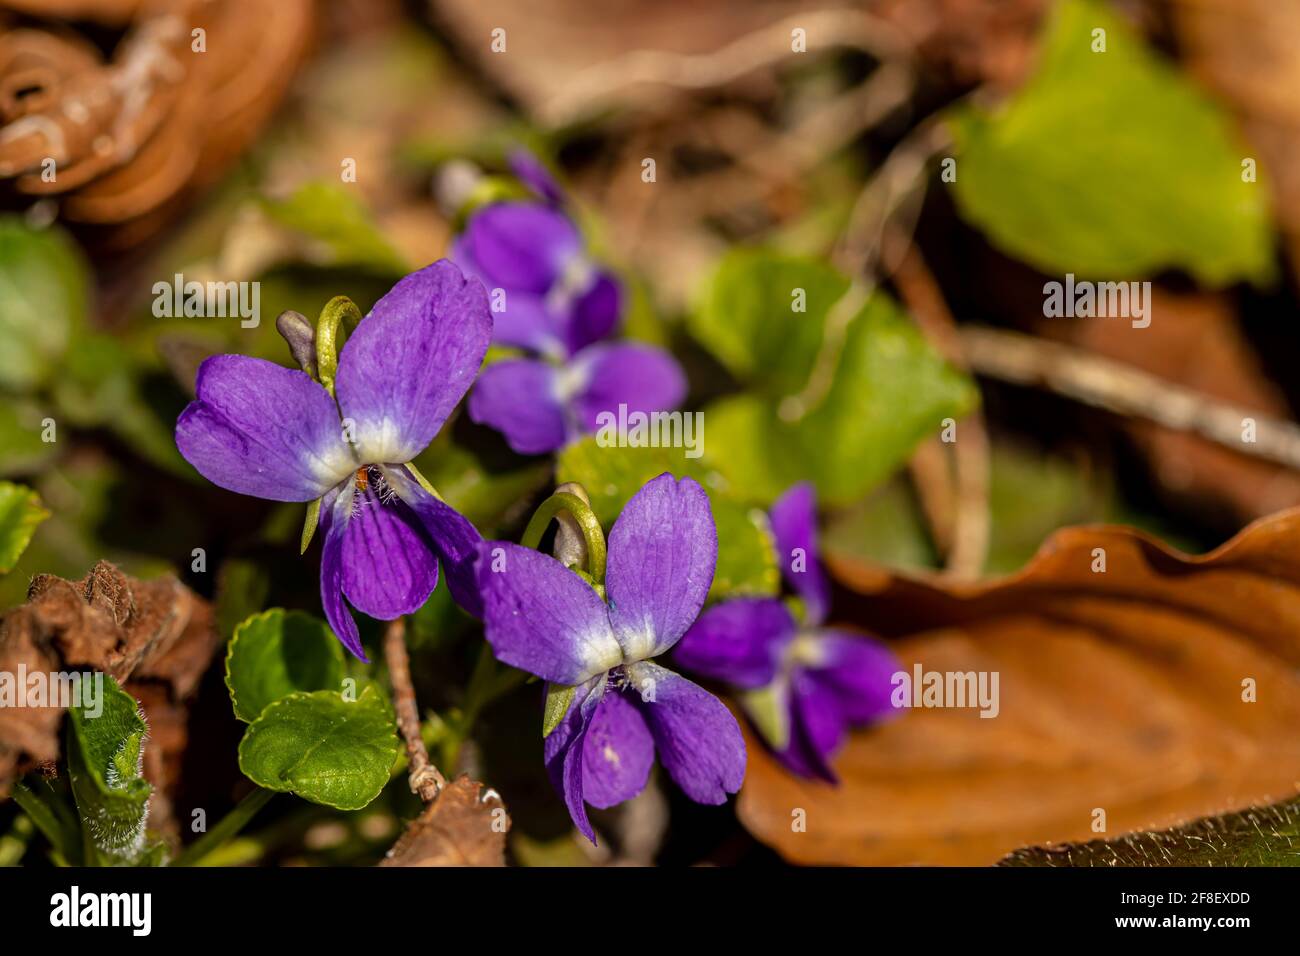 Hairy violet flower in the forest, close up Stock Photo